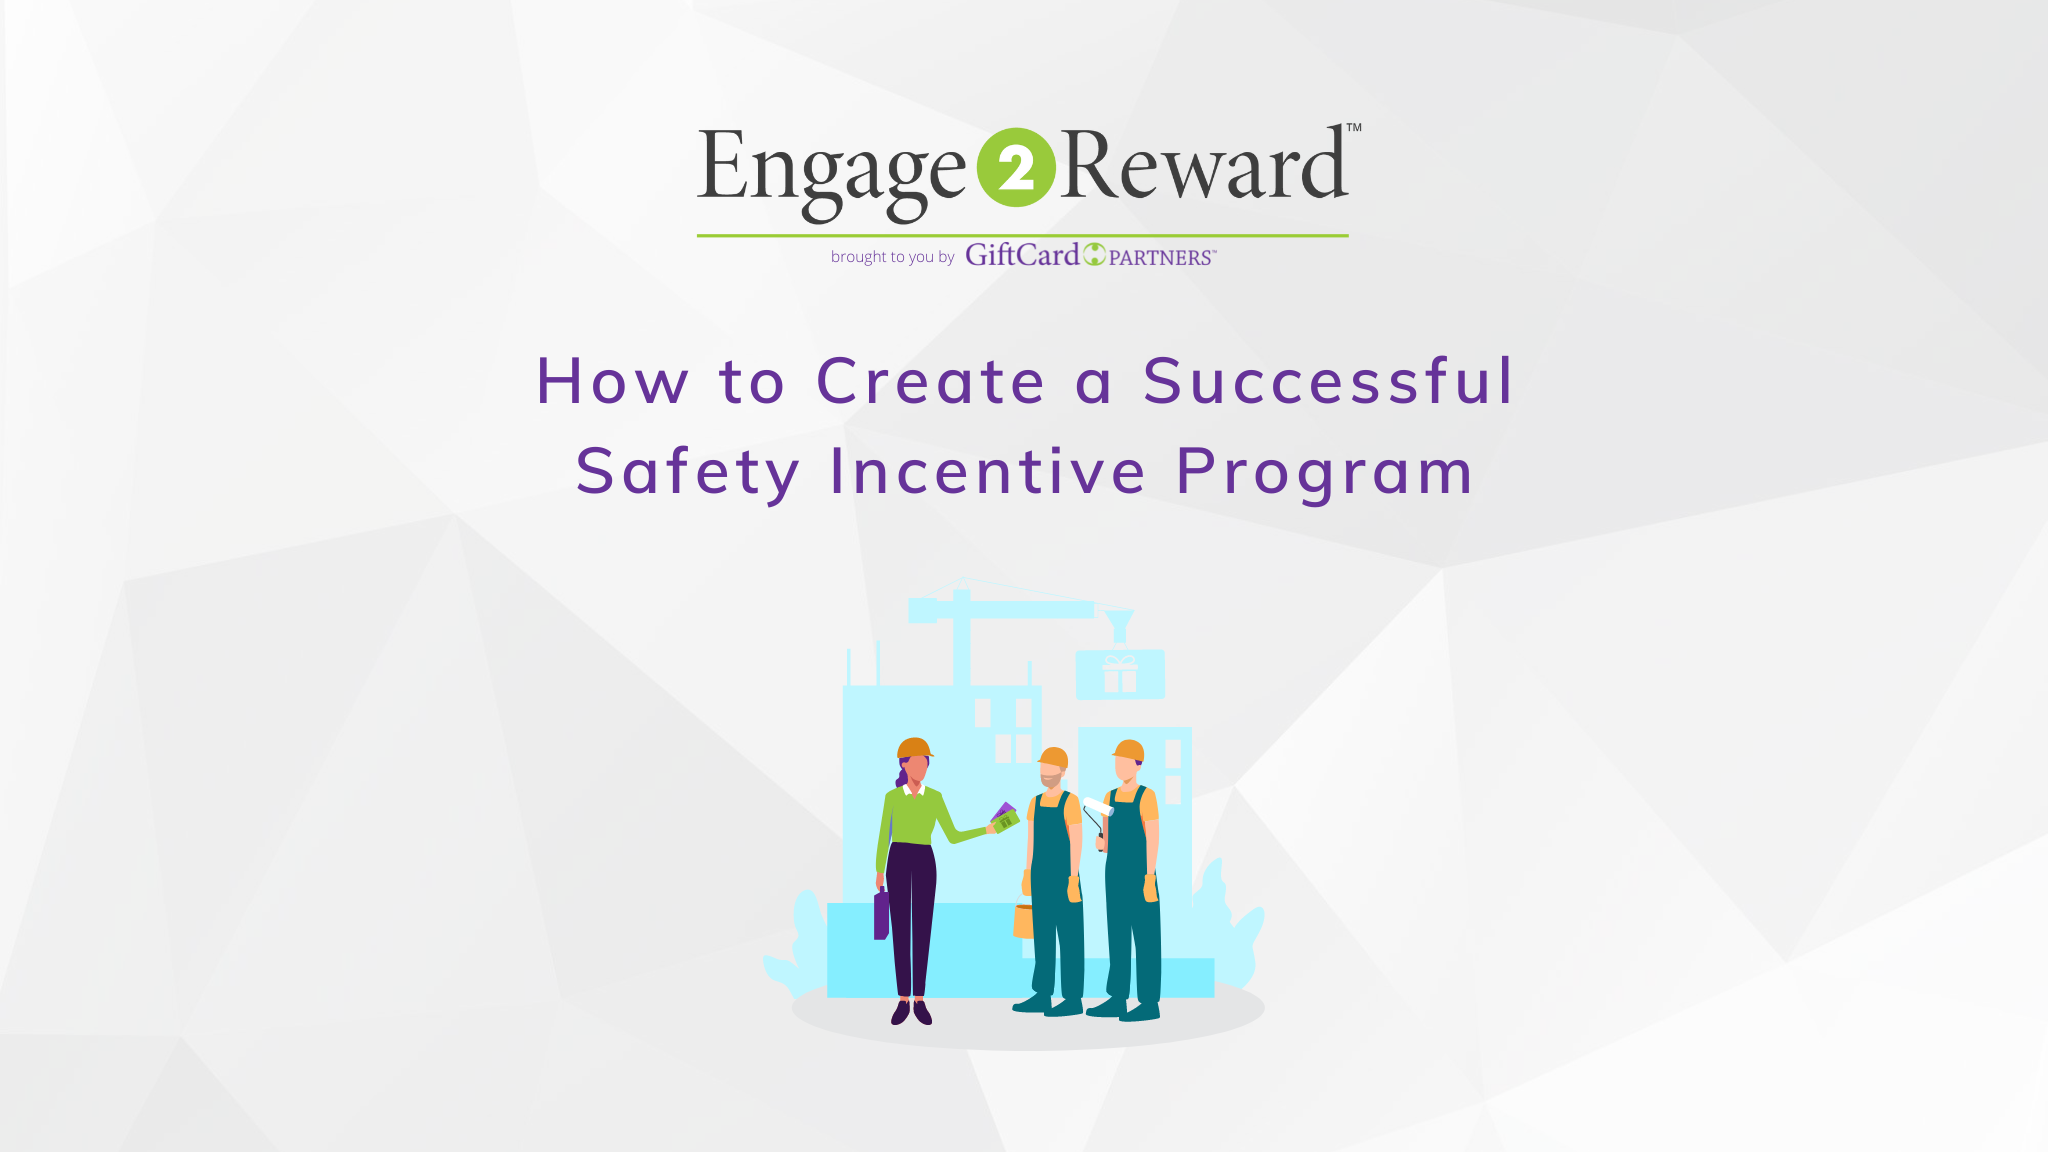 How to Create a Successful Safety Incentive Program